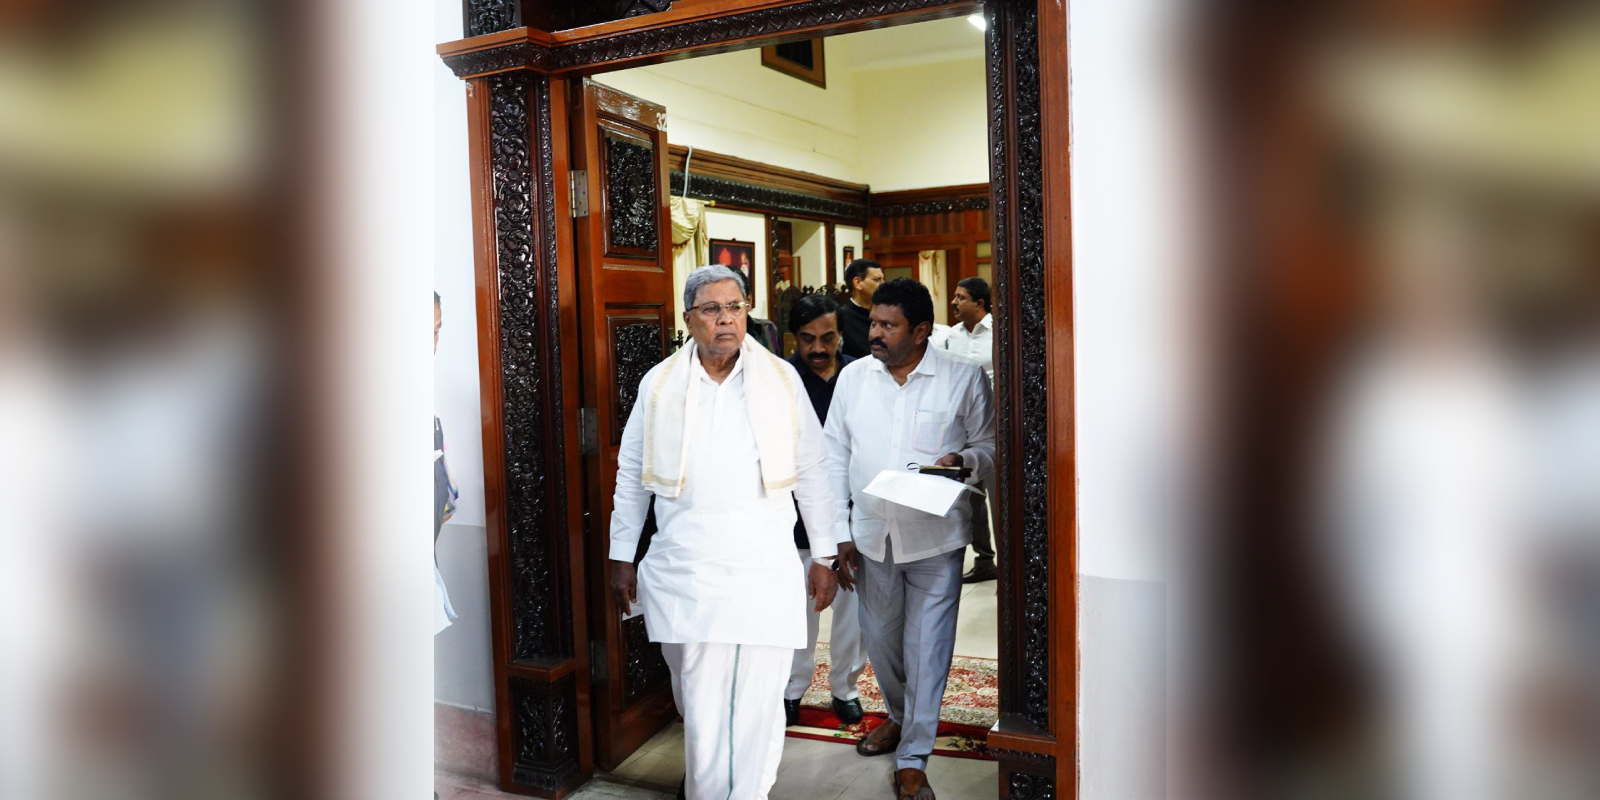 Siddaramaiah-led government to repeal changes to the anti-conversion law. (Siddaramaiah/ Twitter)